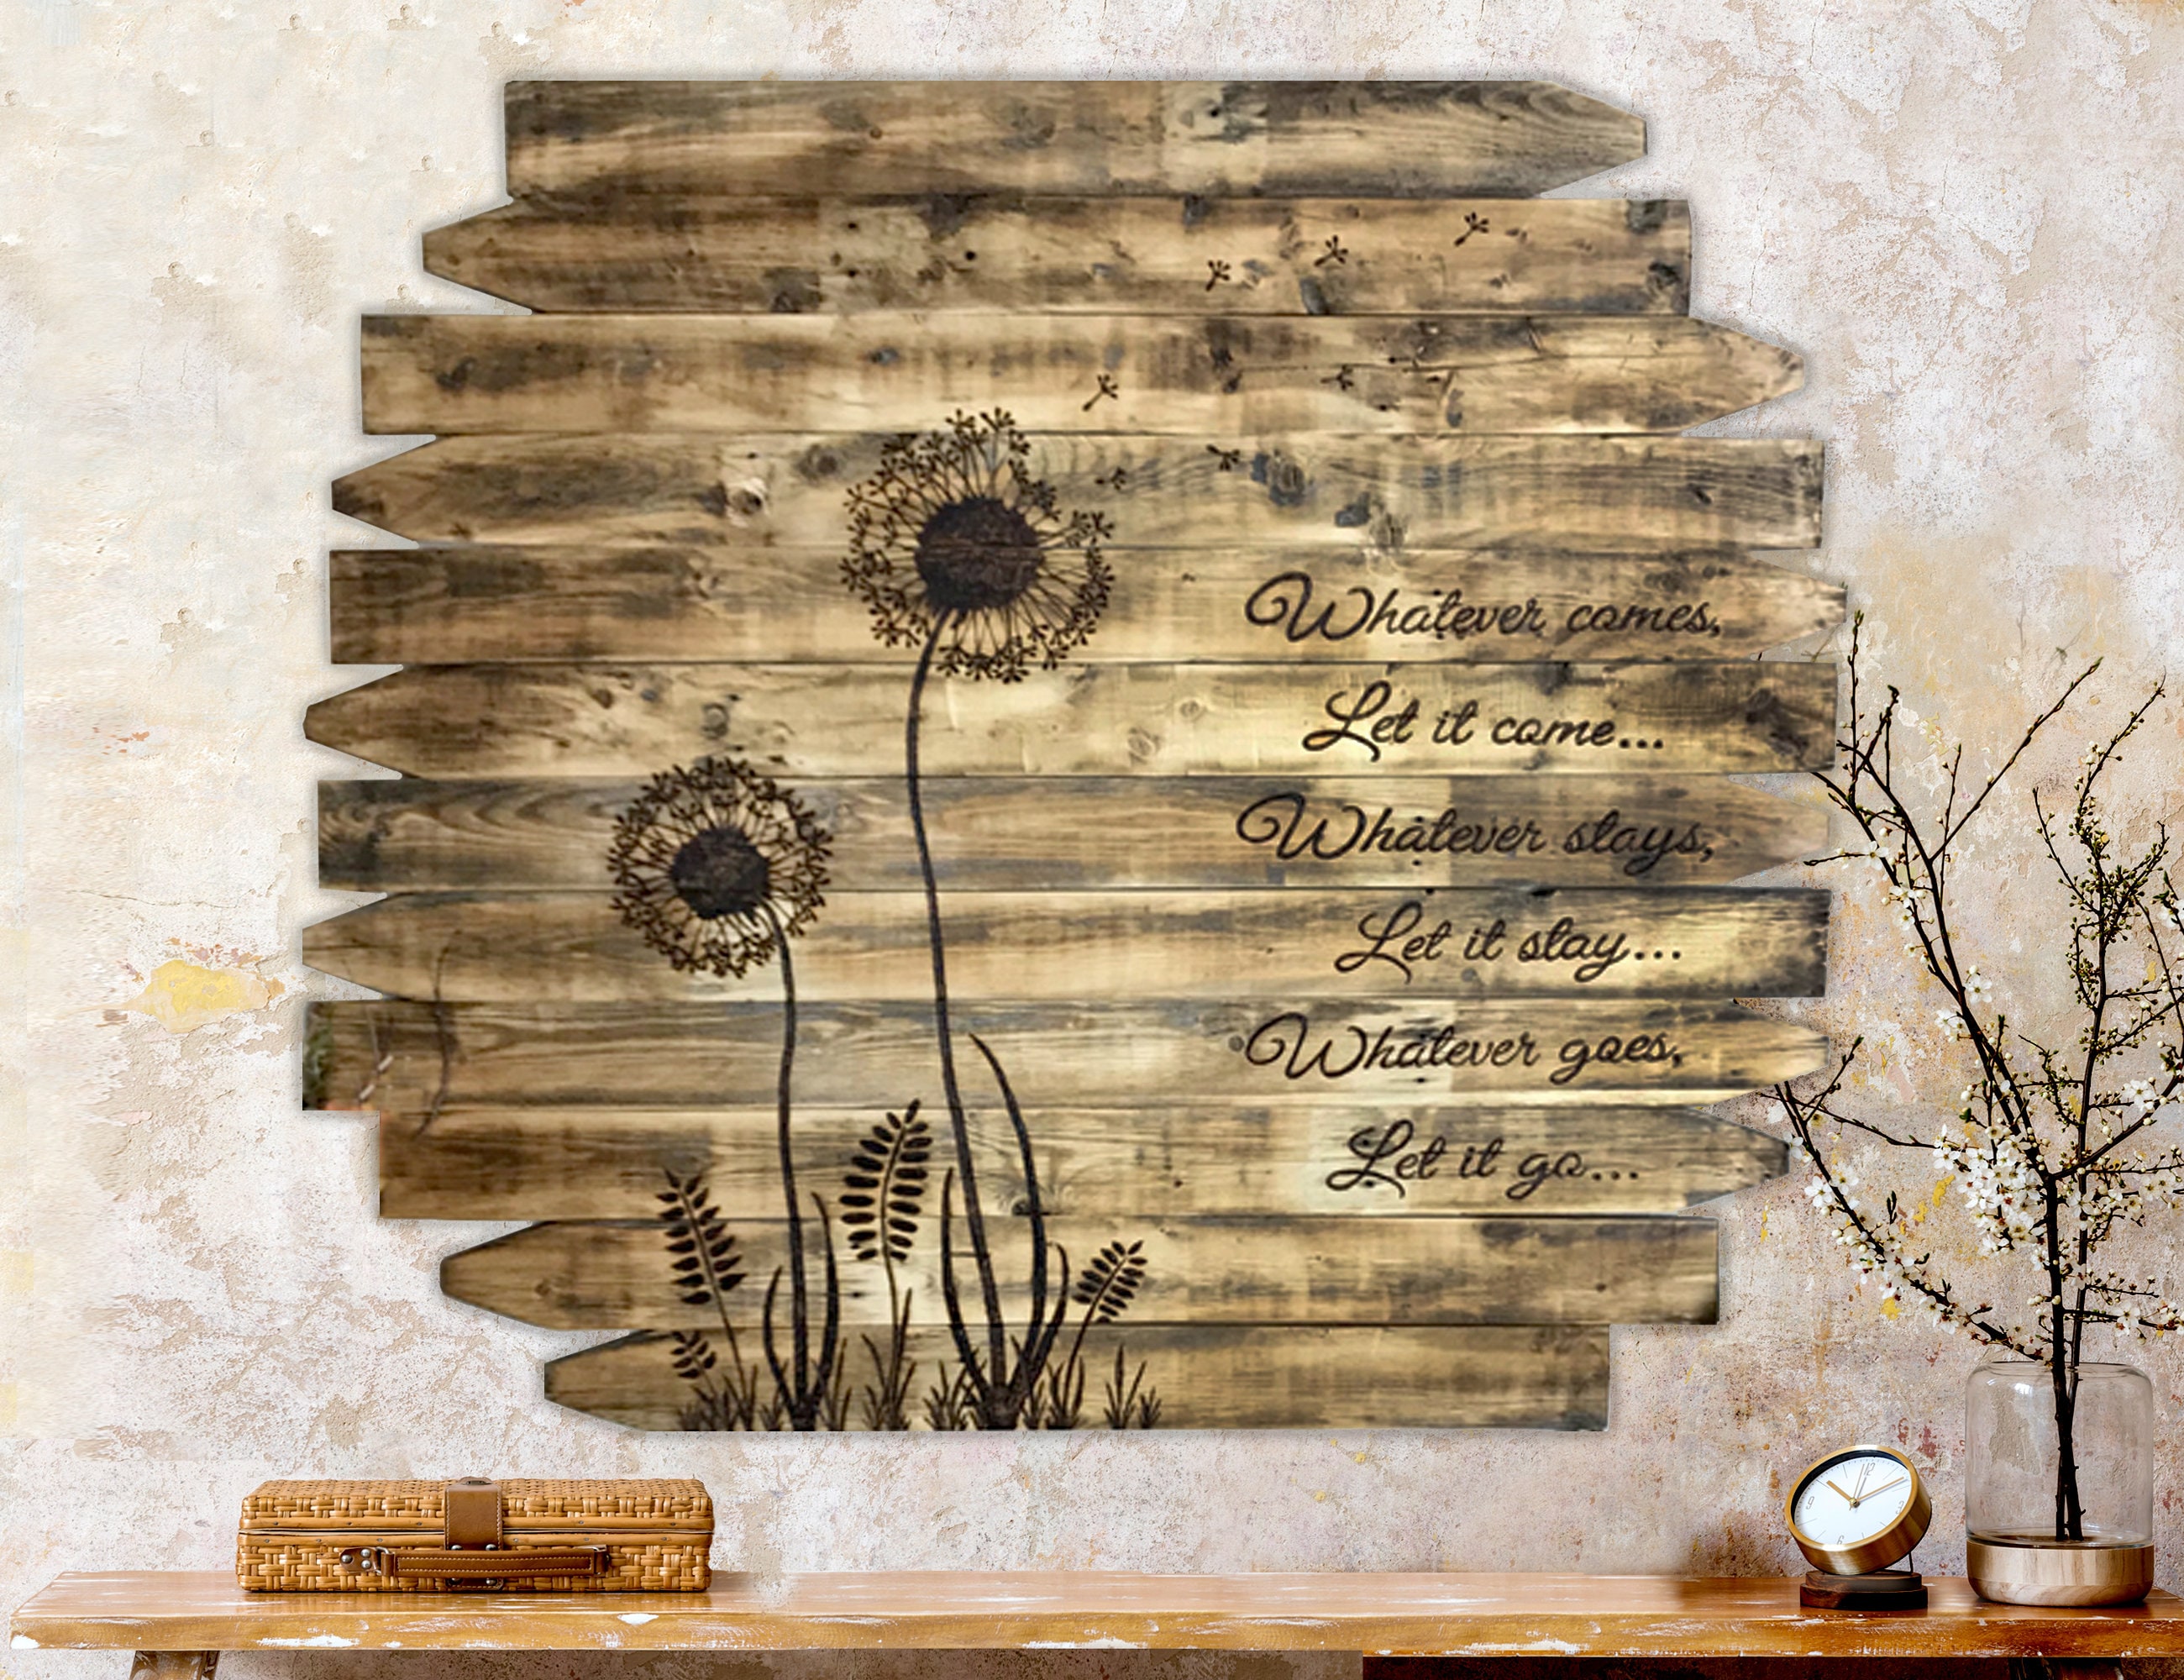 I Am only pretending to be organized Wood Wall Art by TheLoveState